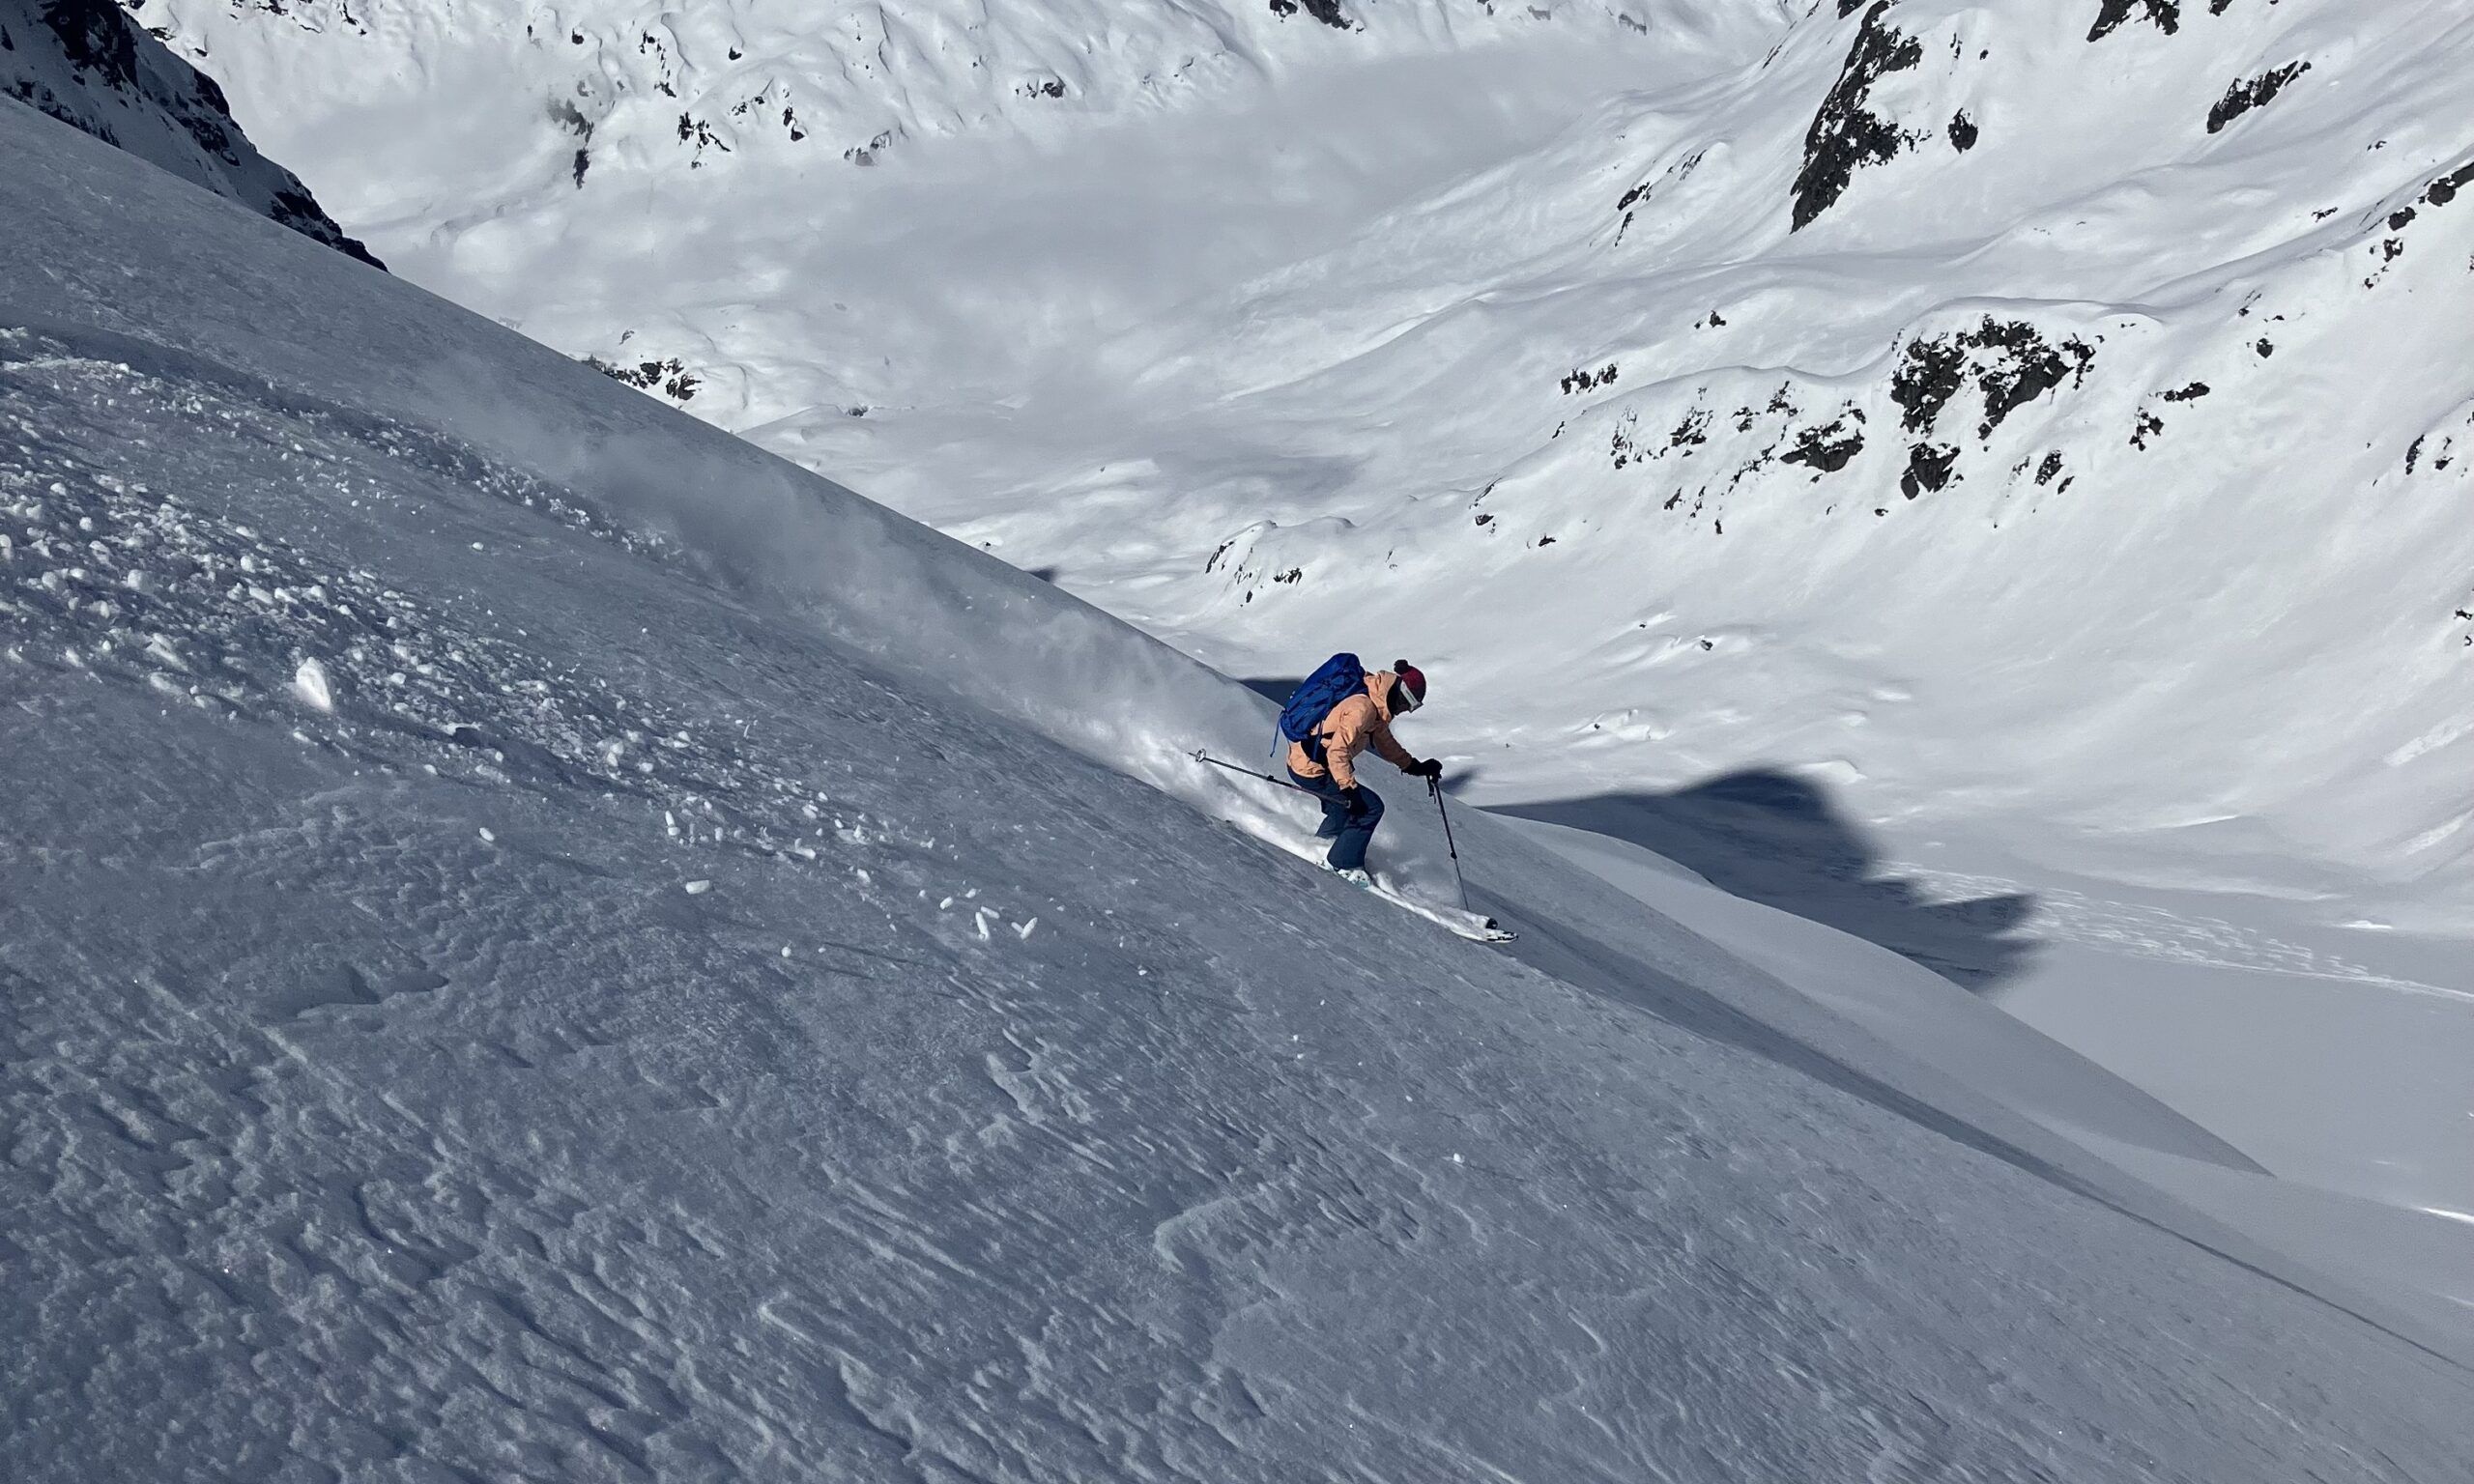 Practicing the ski turns on the Chamonix off-piste course